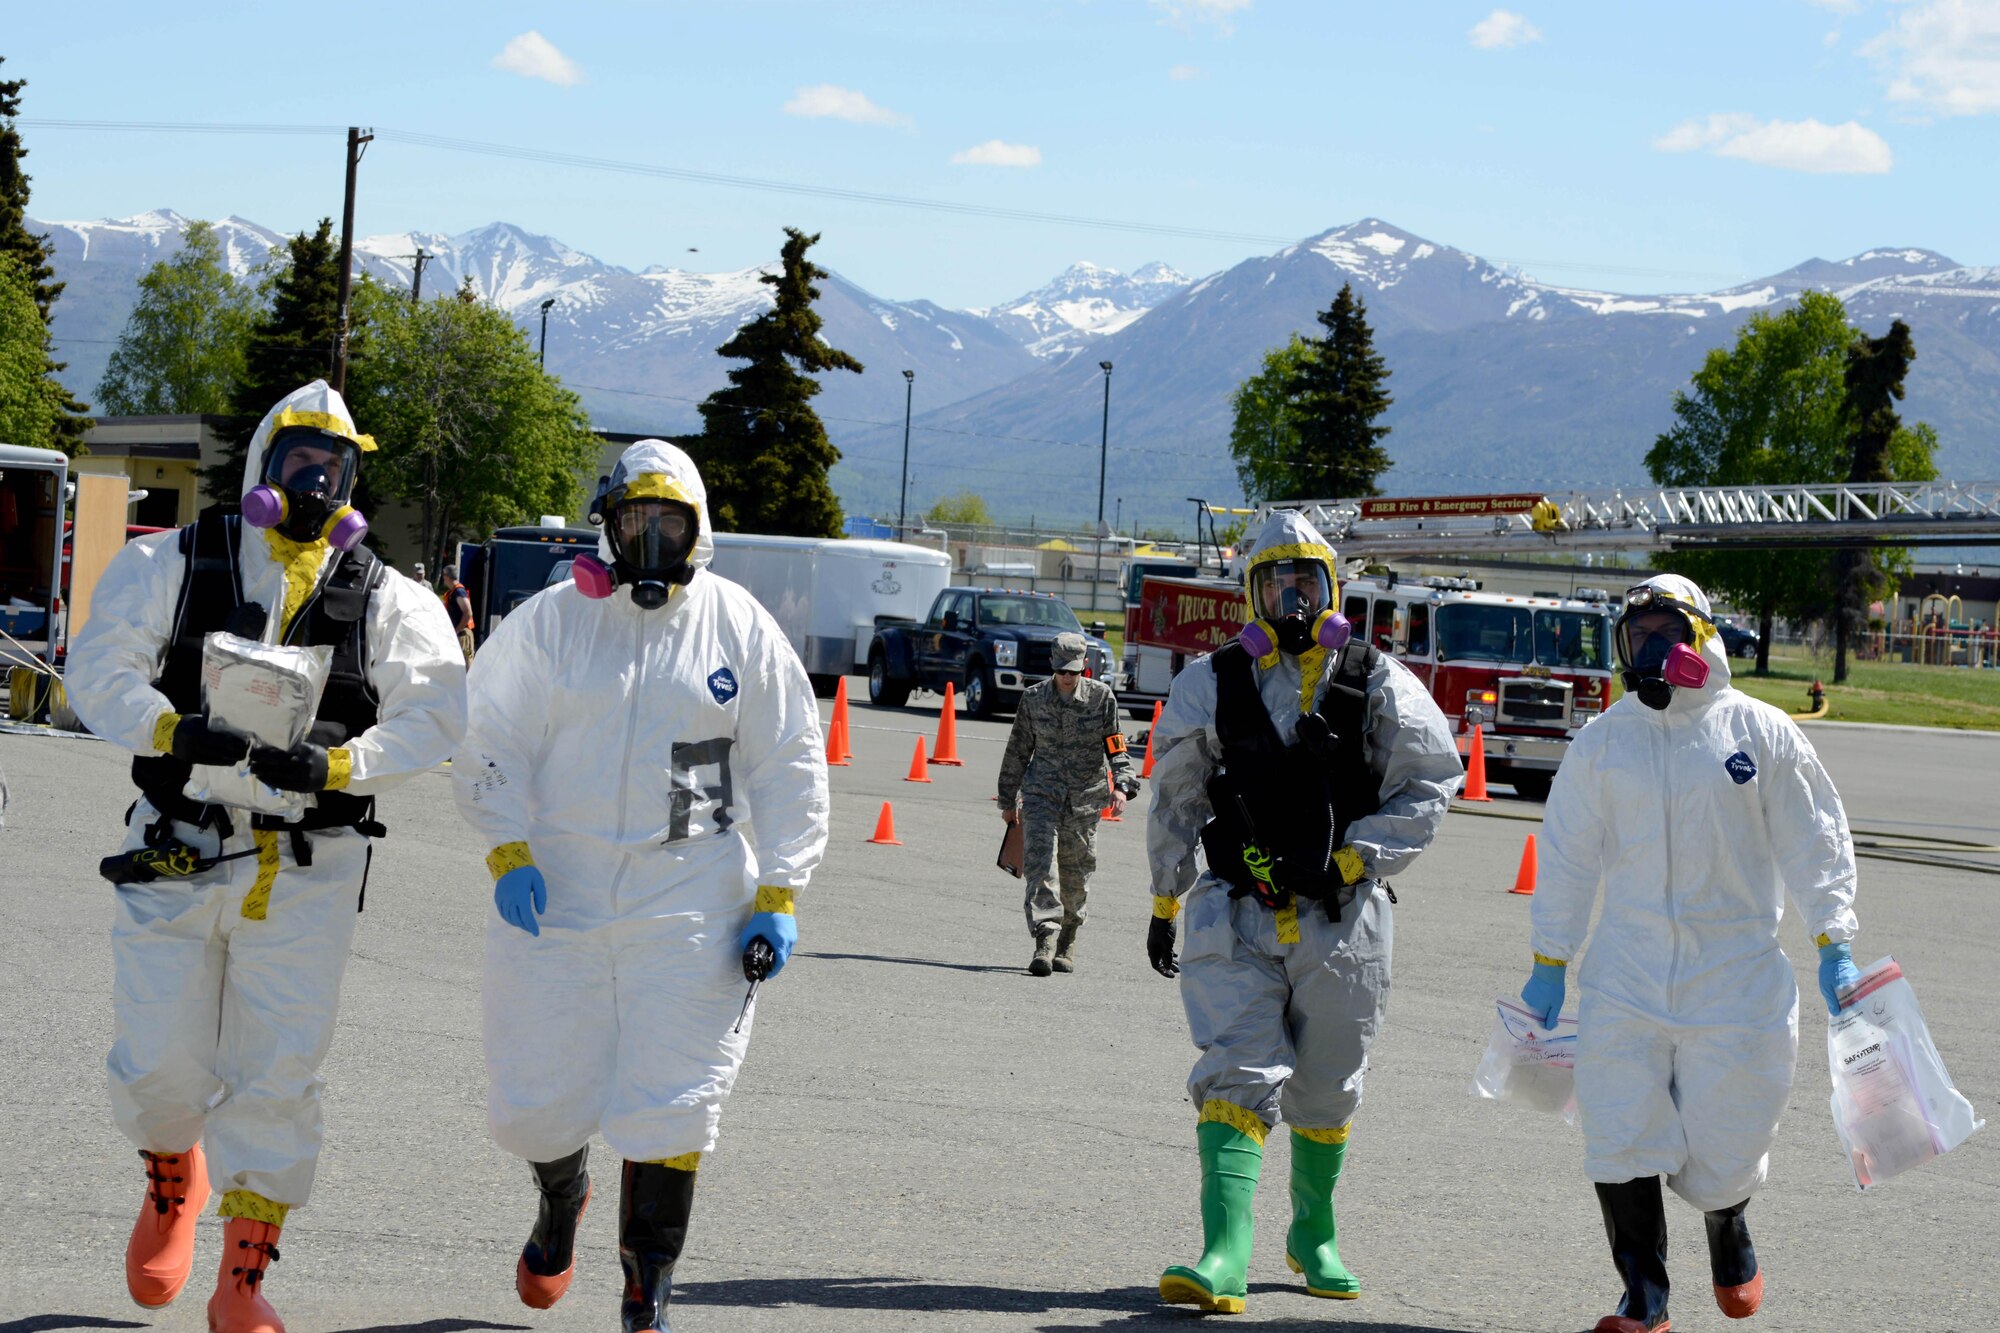 Airmen of the 673d Aerospace Medical Squadron in their hazardous material suits make their way toward the Talkeetna Theater during a Mission Assurance Exercise, June 1, 2017. The exercise tested the installation’s capabilities in dealing with a simulated anthrax attack.